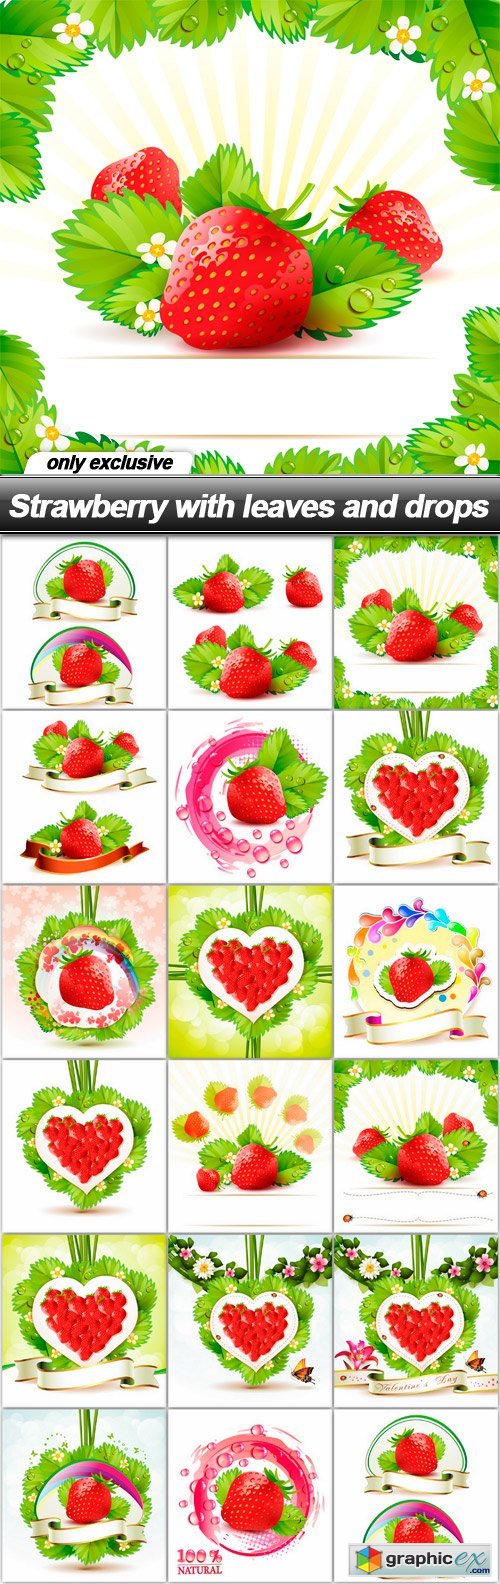 Strawberry with leaves and drops - 17 EPS